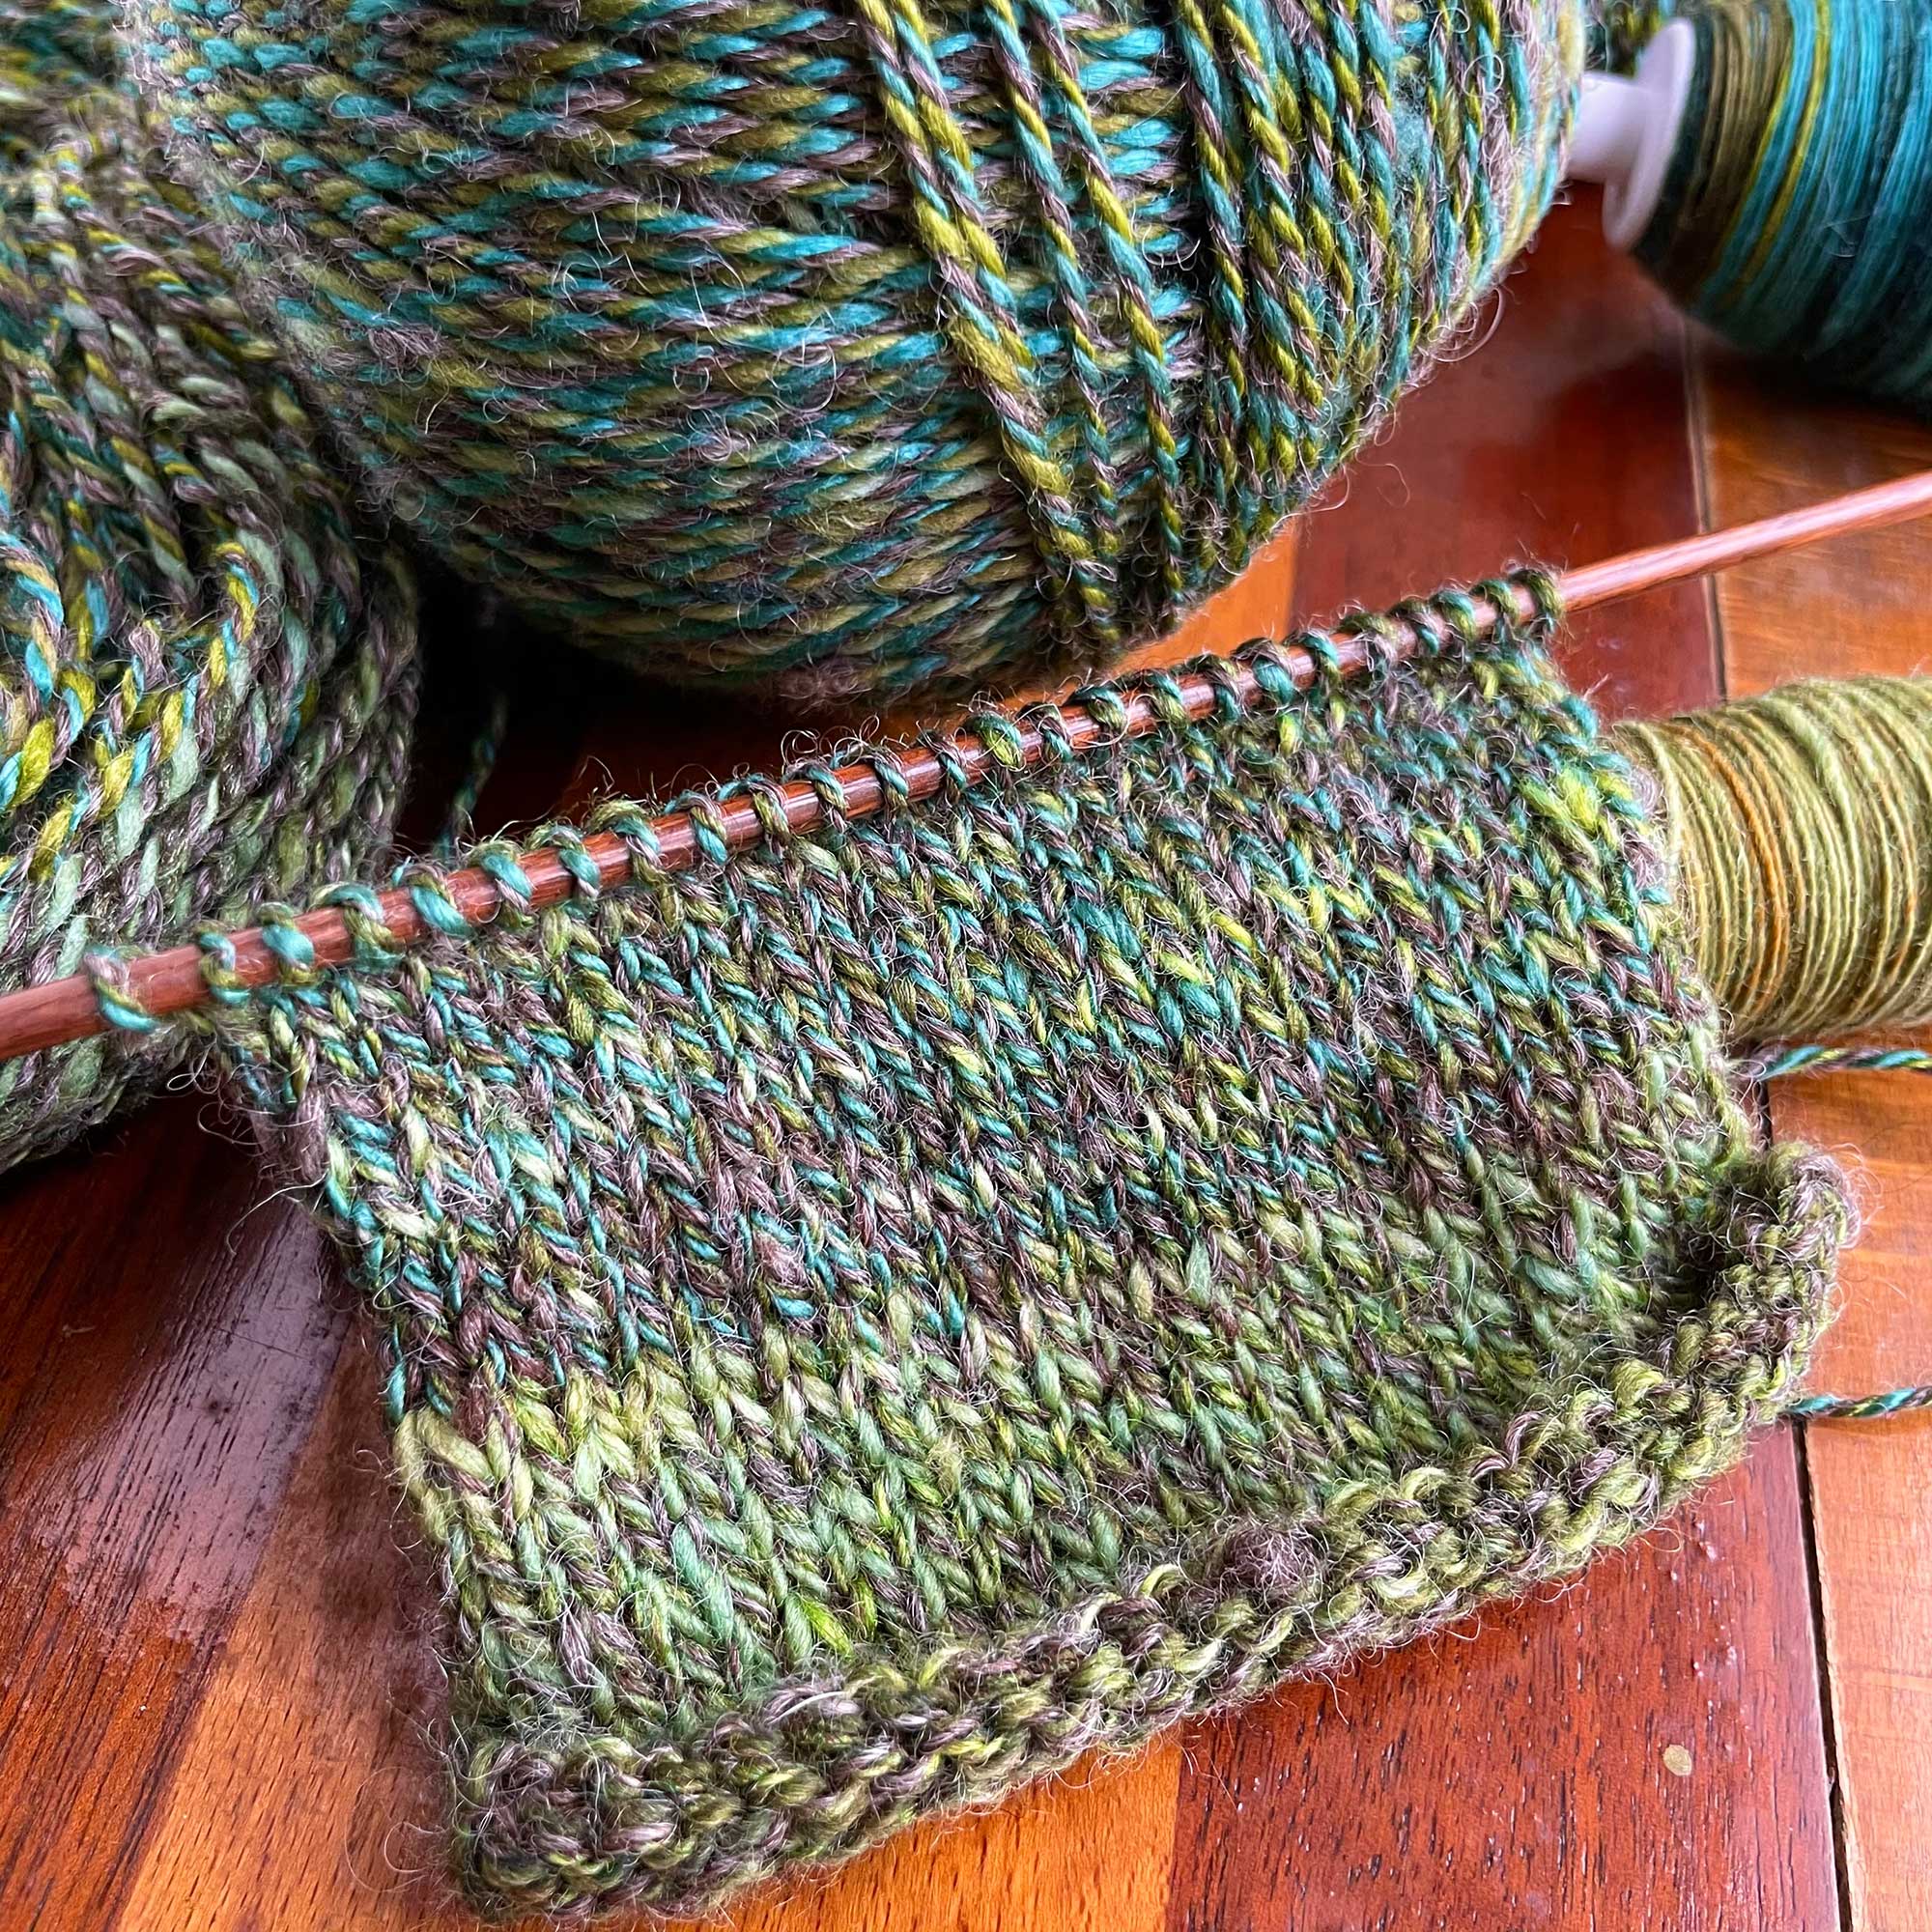 Spun up some multicolored yarn with plans to knit a sweater for my